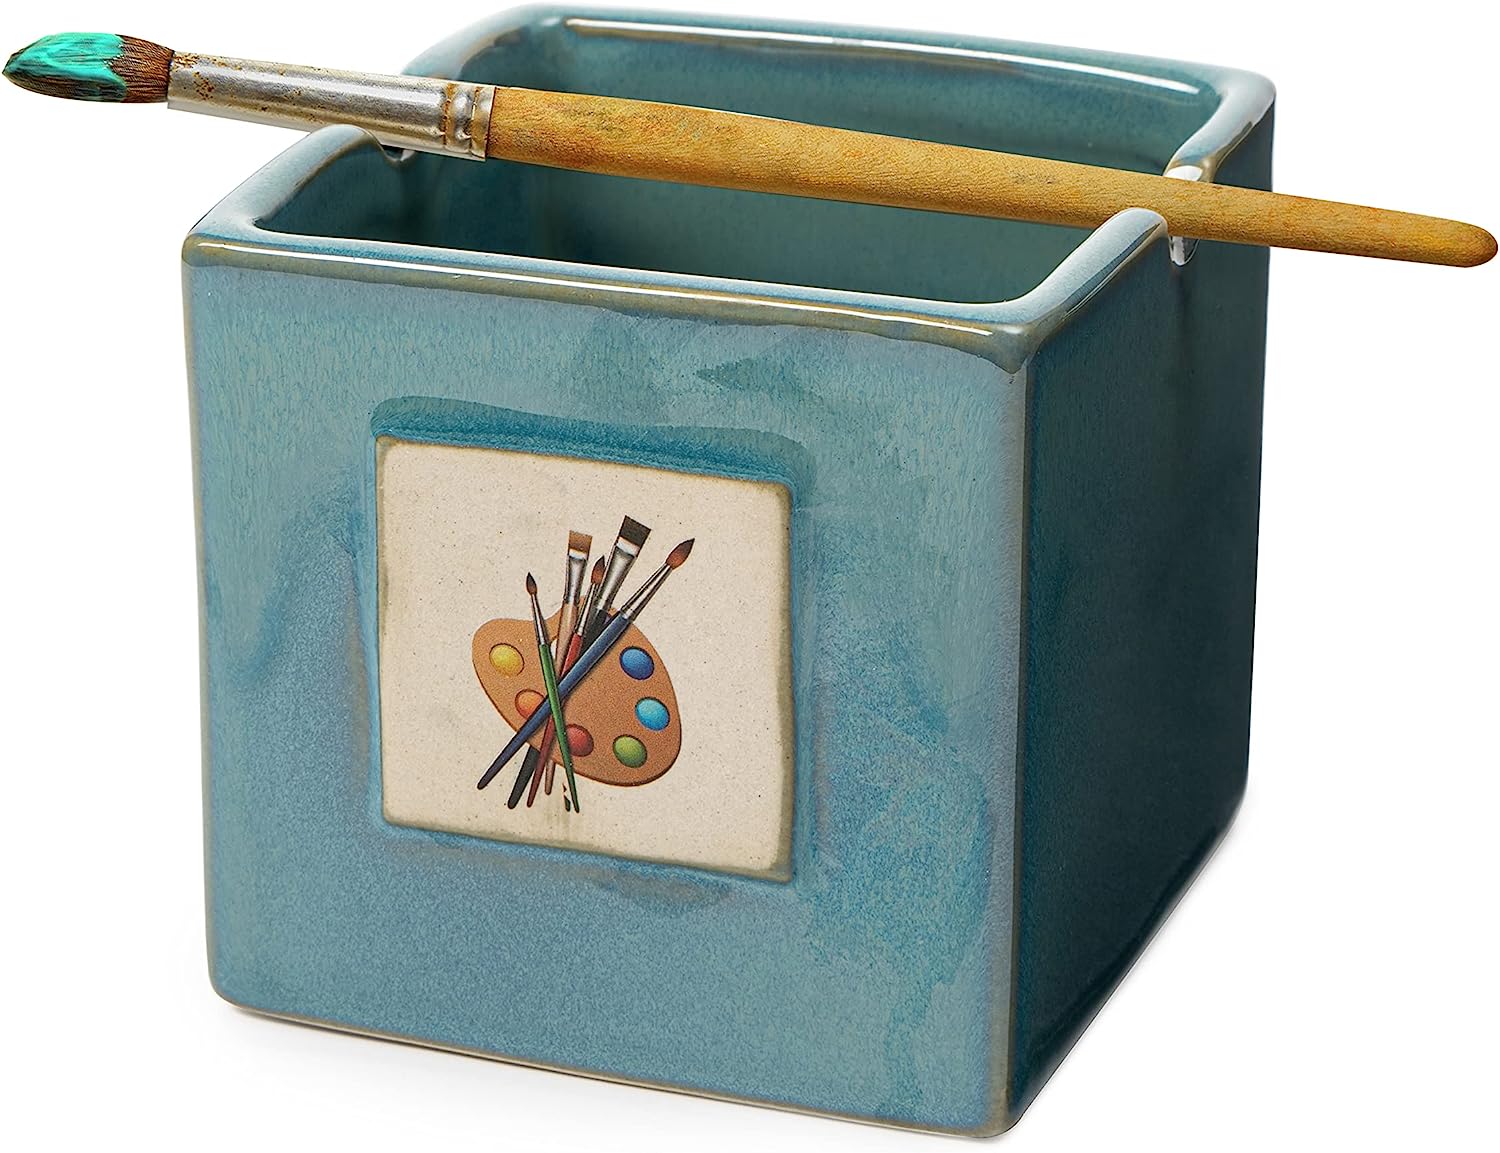 Painters Artist Cup, Paint Brush Holder & Cleaner 3.5